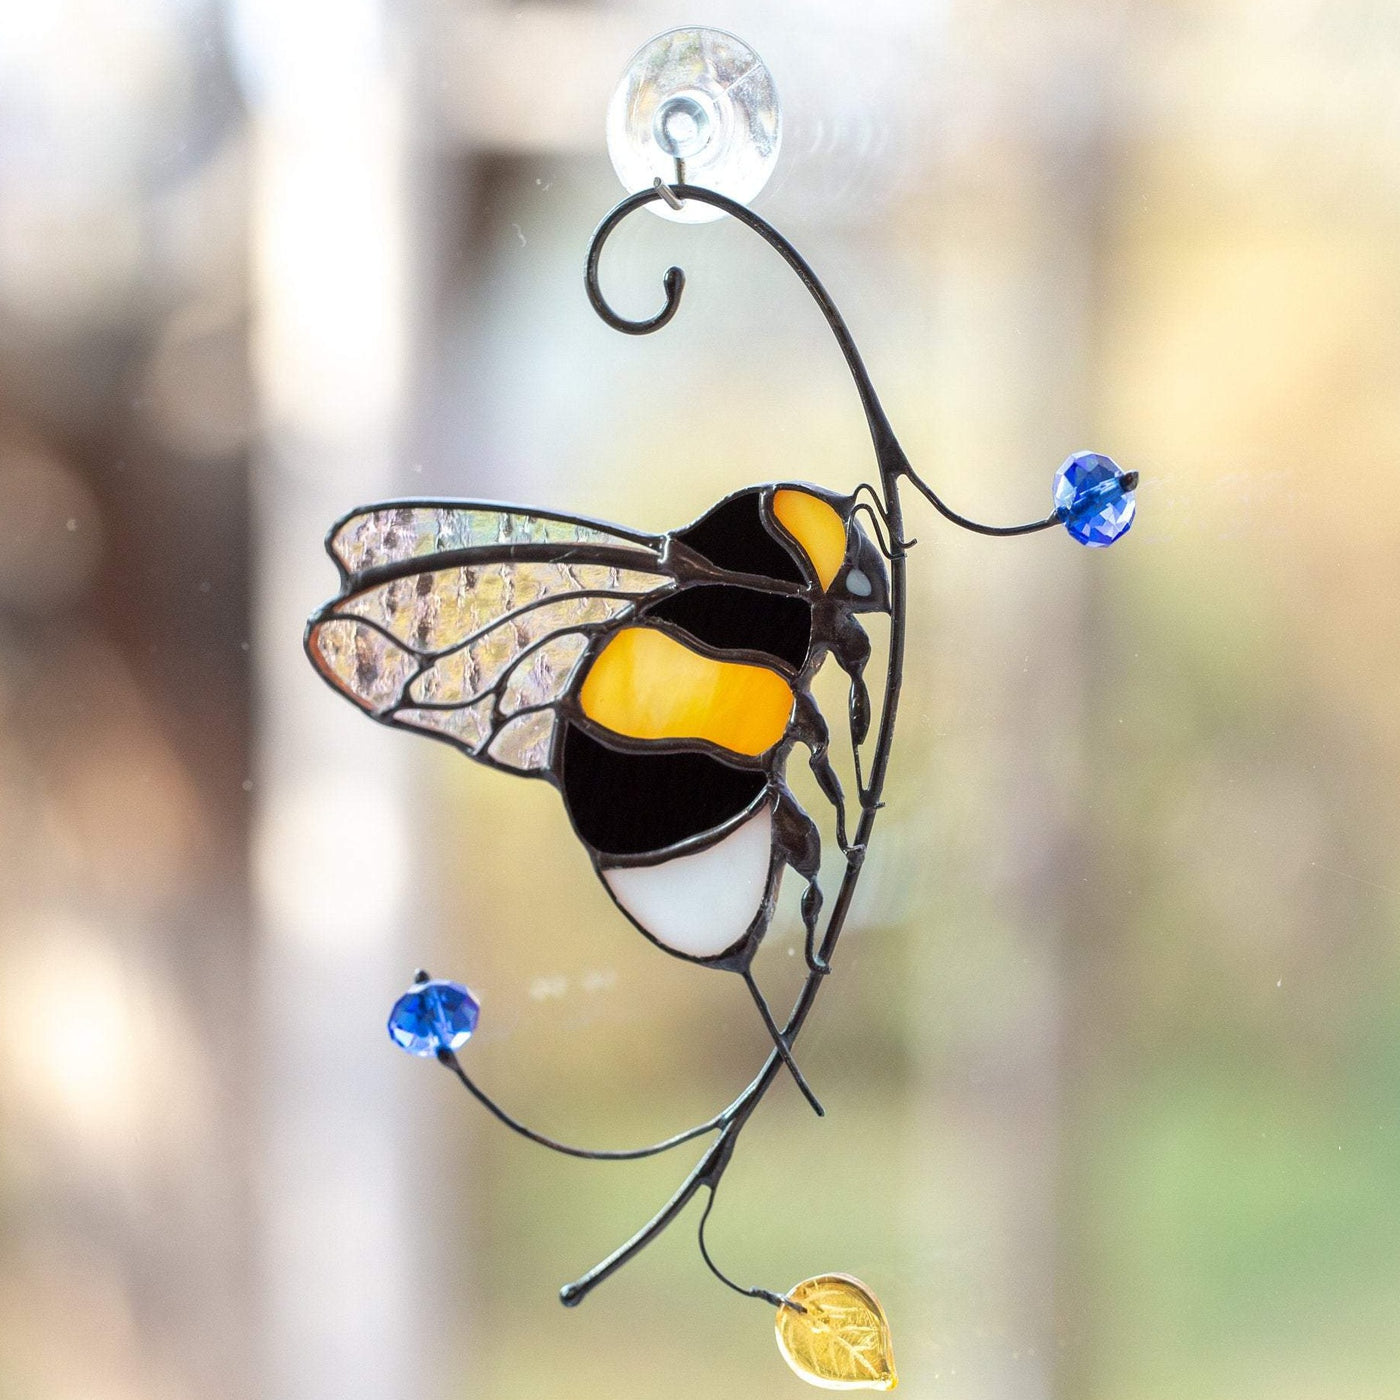 Stained glass suncatcher of a bumblebee with clear wings